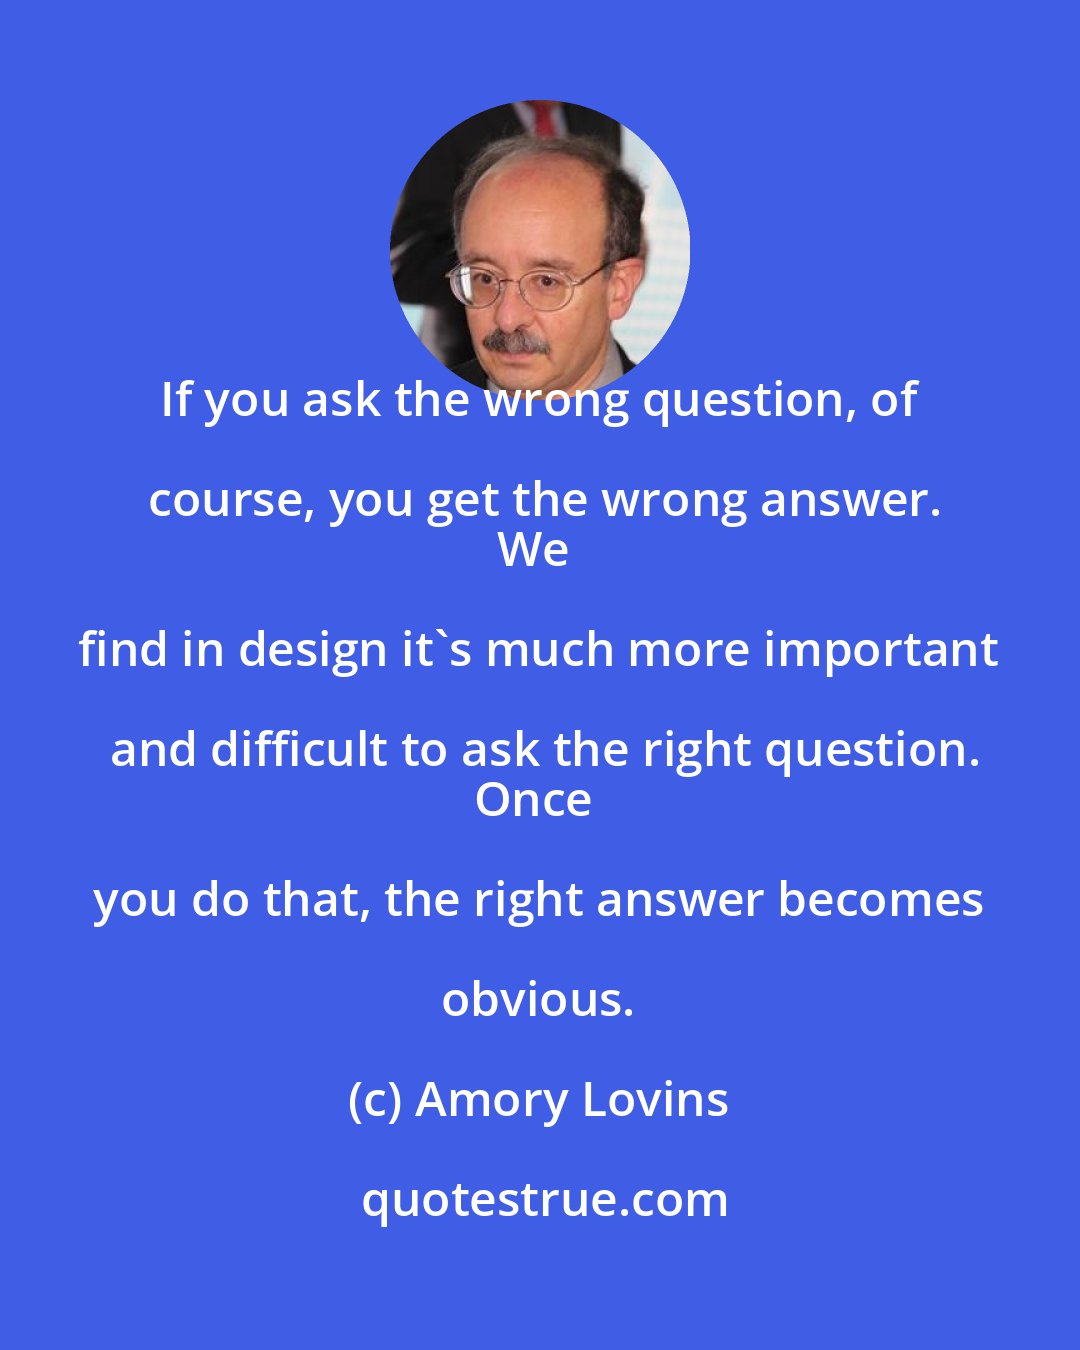 Amory Lovins: If you ask the wrong question, of course, you get the wrong answer.
We find in design it's much more important and difficult to ask the right question.
Once you do that, the right answer becomes obvious.